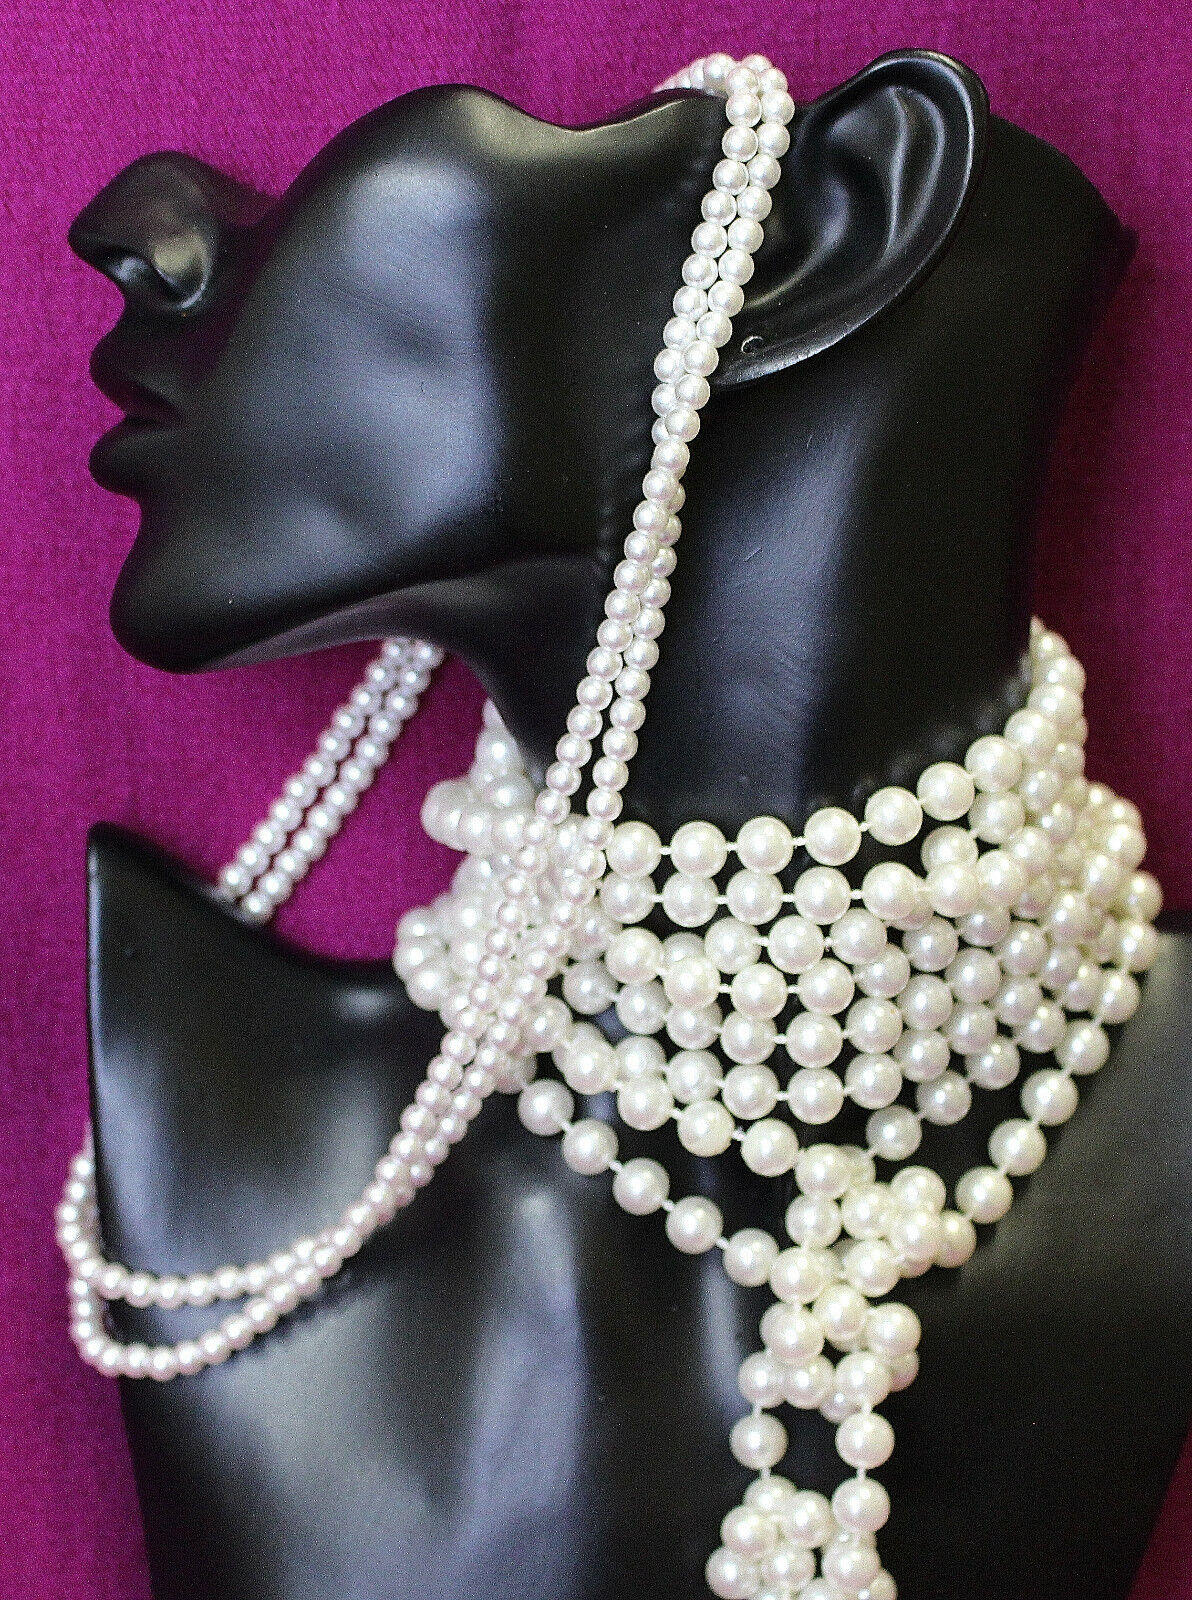 Bulk Lot 2 Faux Pearl Necklaces Craft Market Stall Dress Up Decorations VG 0321  Unbranded